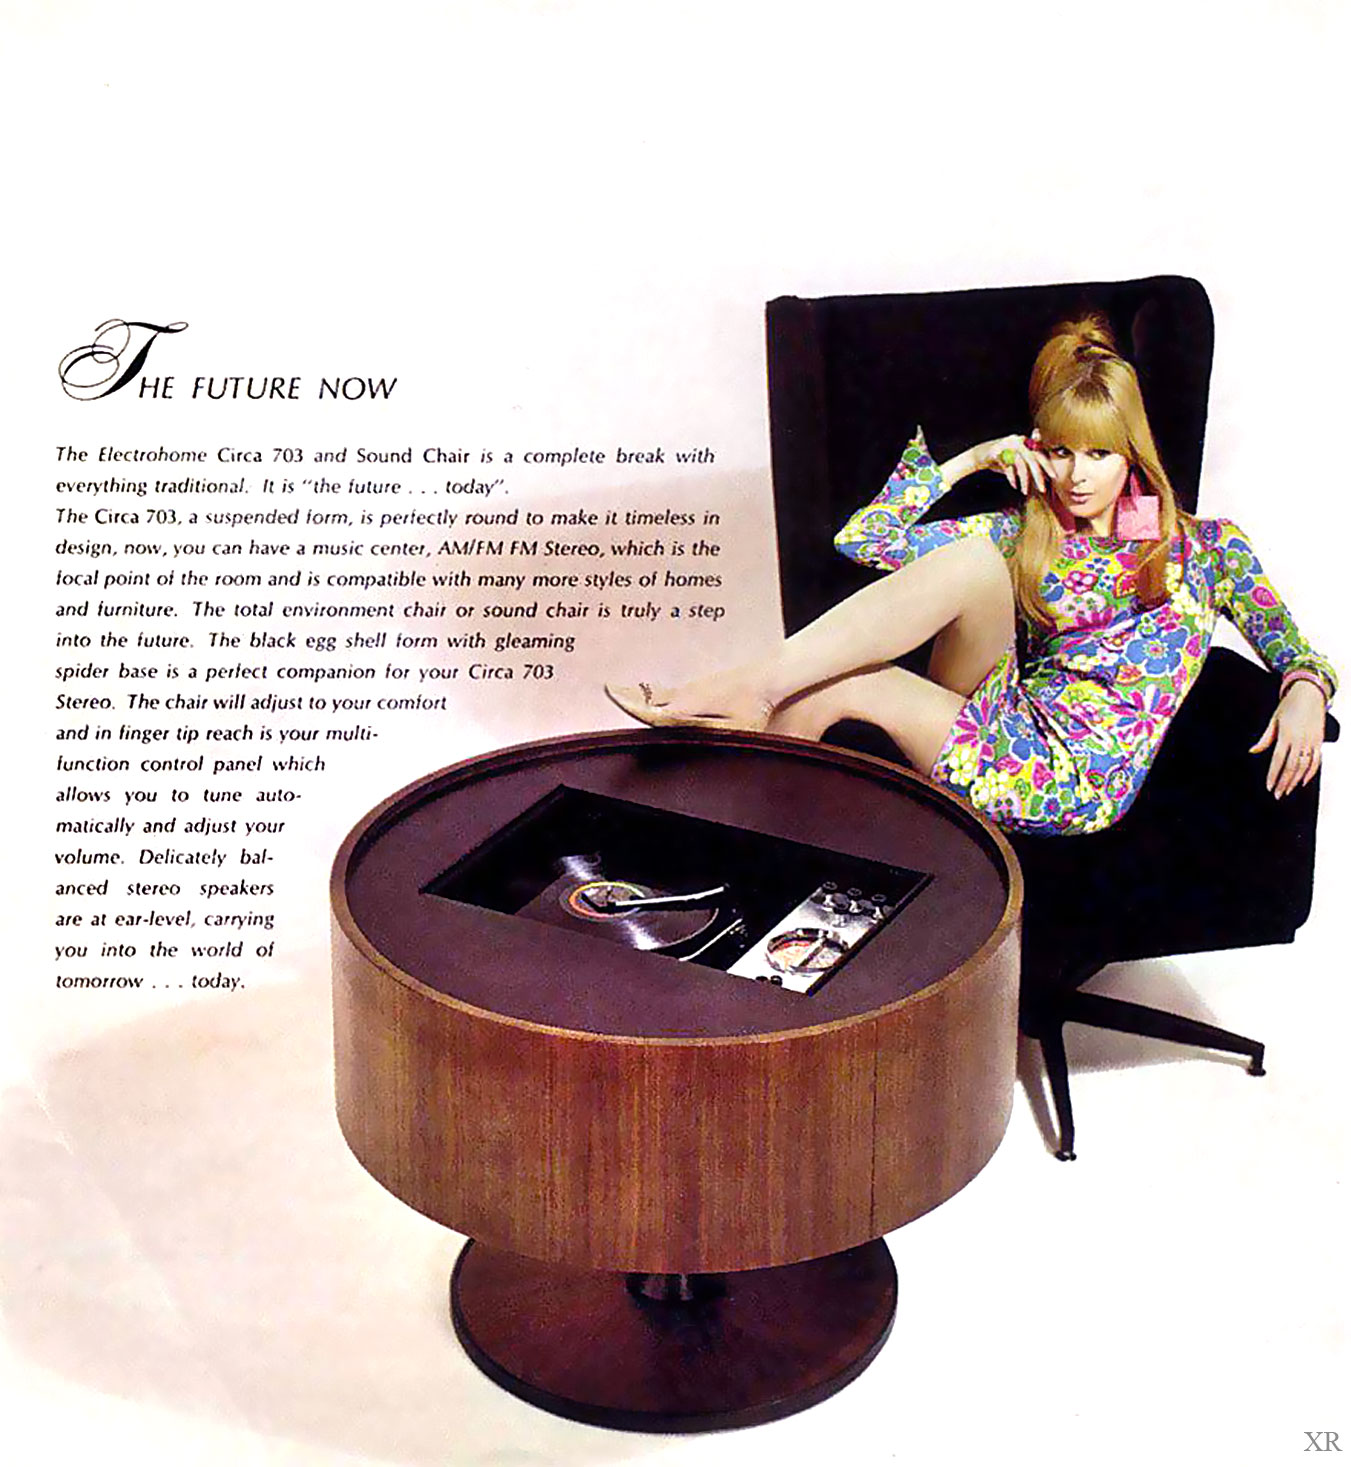 The Electrohome Circa 703 and Sound Chair (1967).jpg